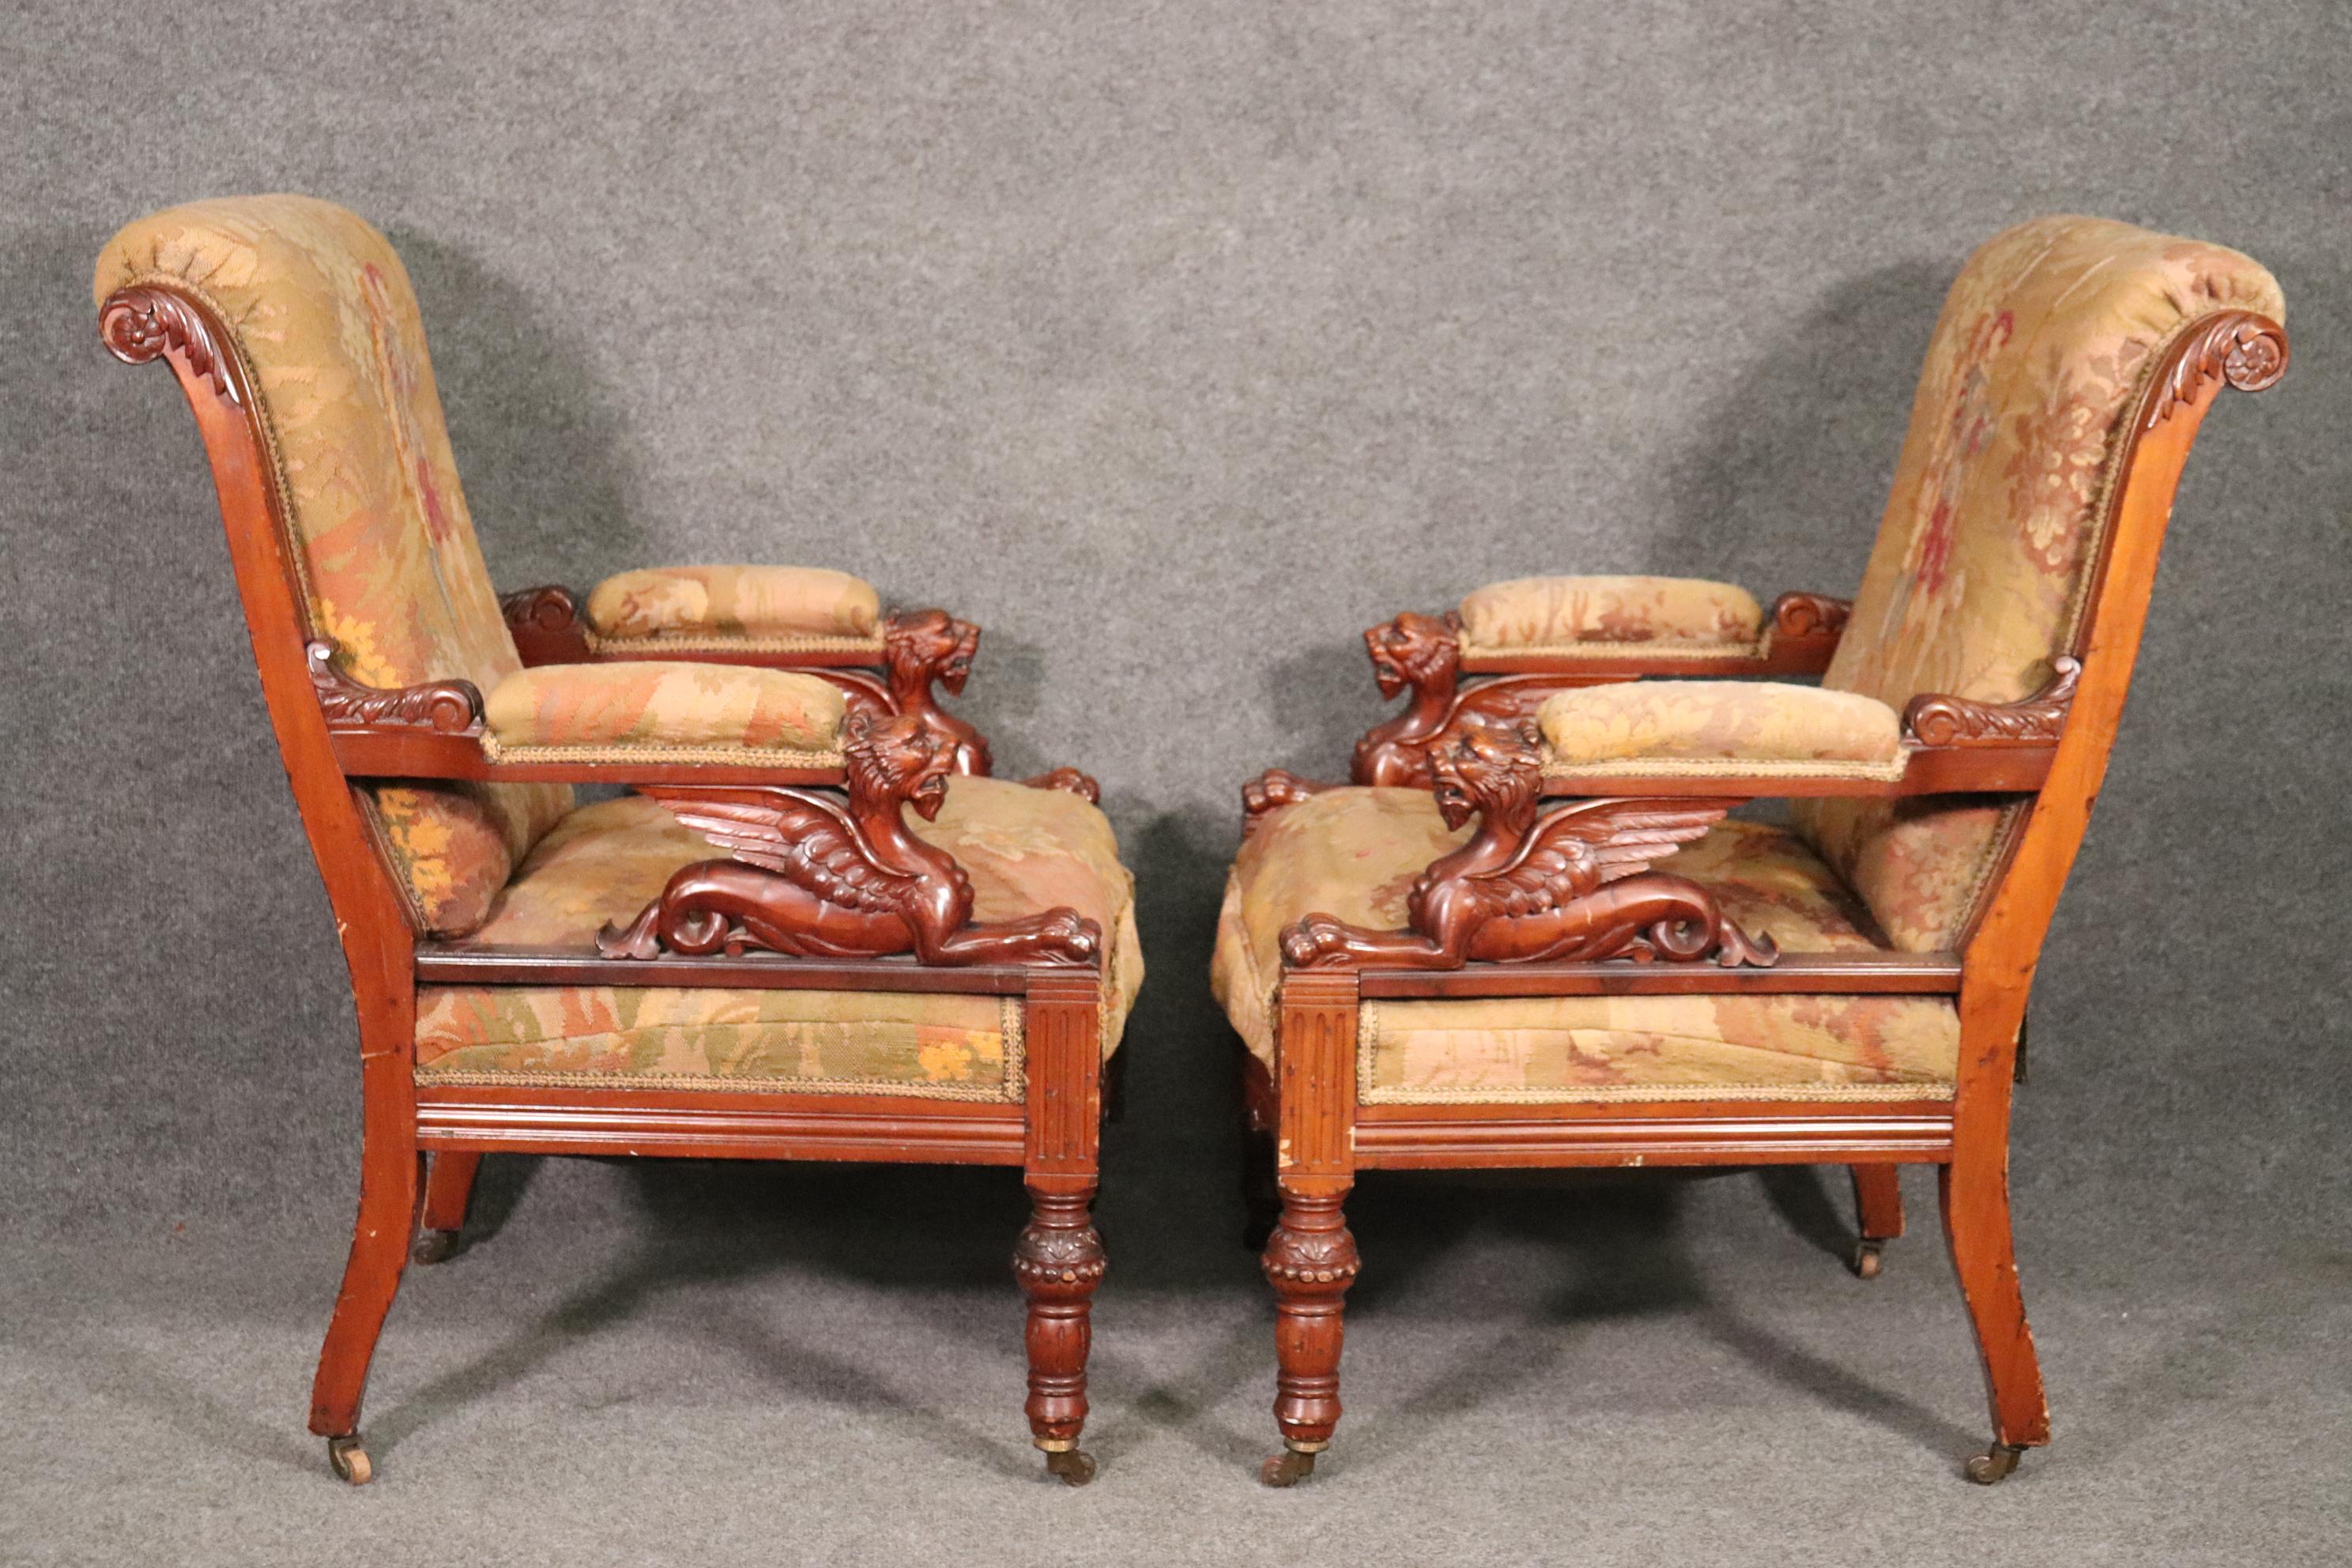 Renaissance Revival Matched Pair RJ Horner Carved Walnut Griffin Club Parlor Chairs, circa 1870